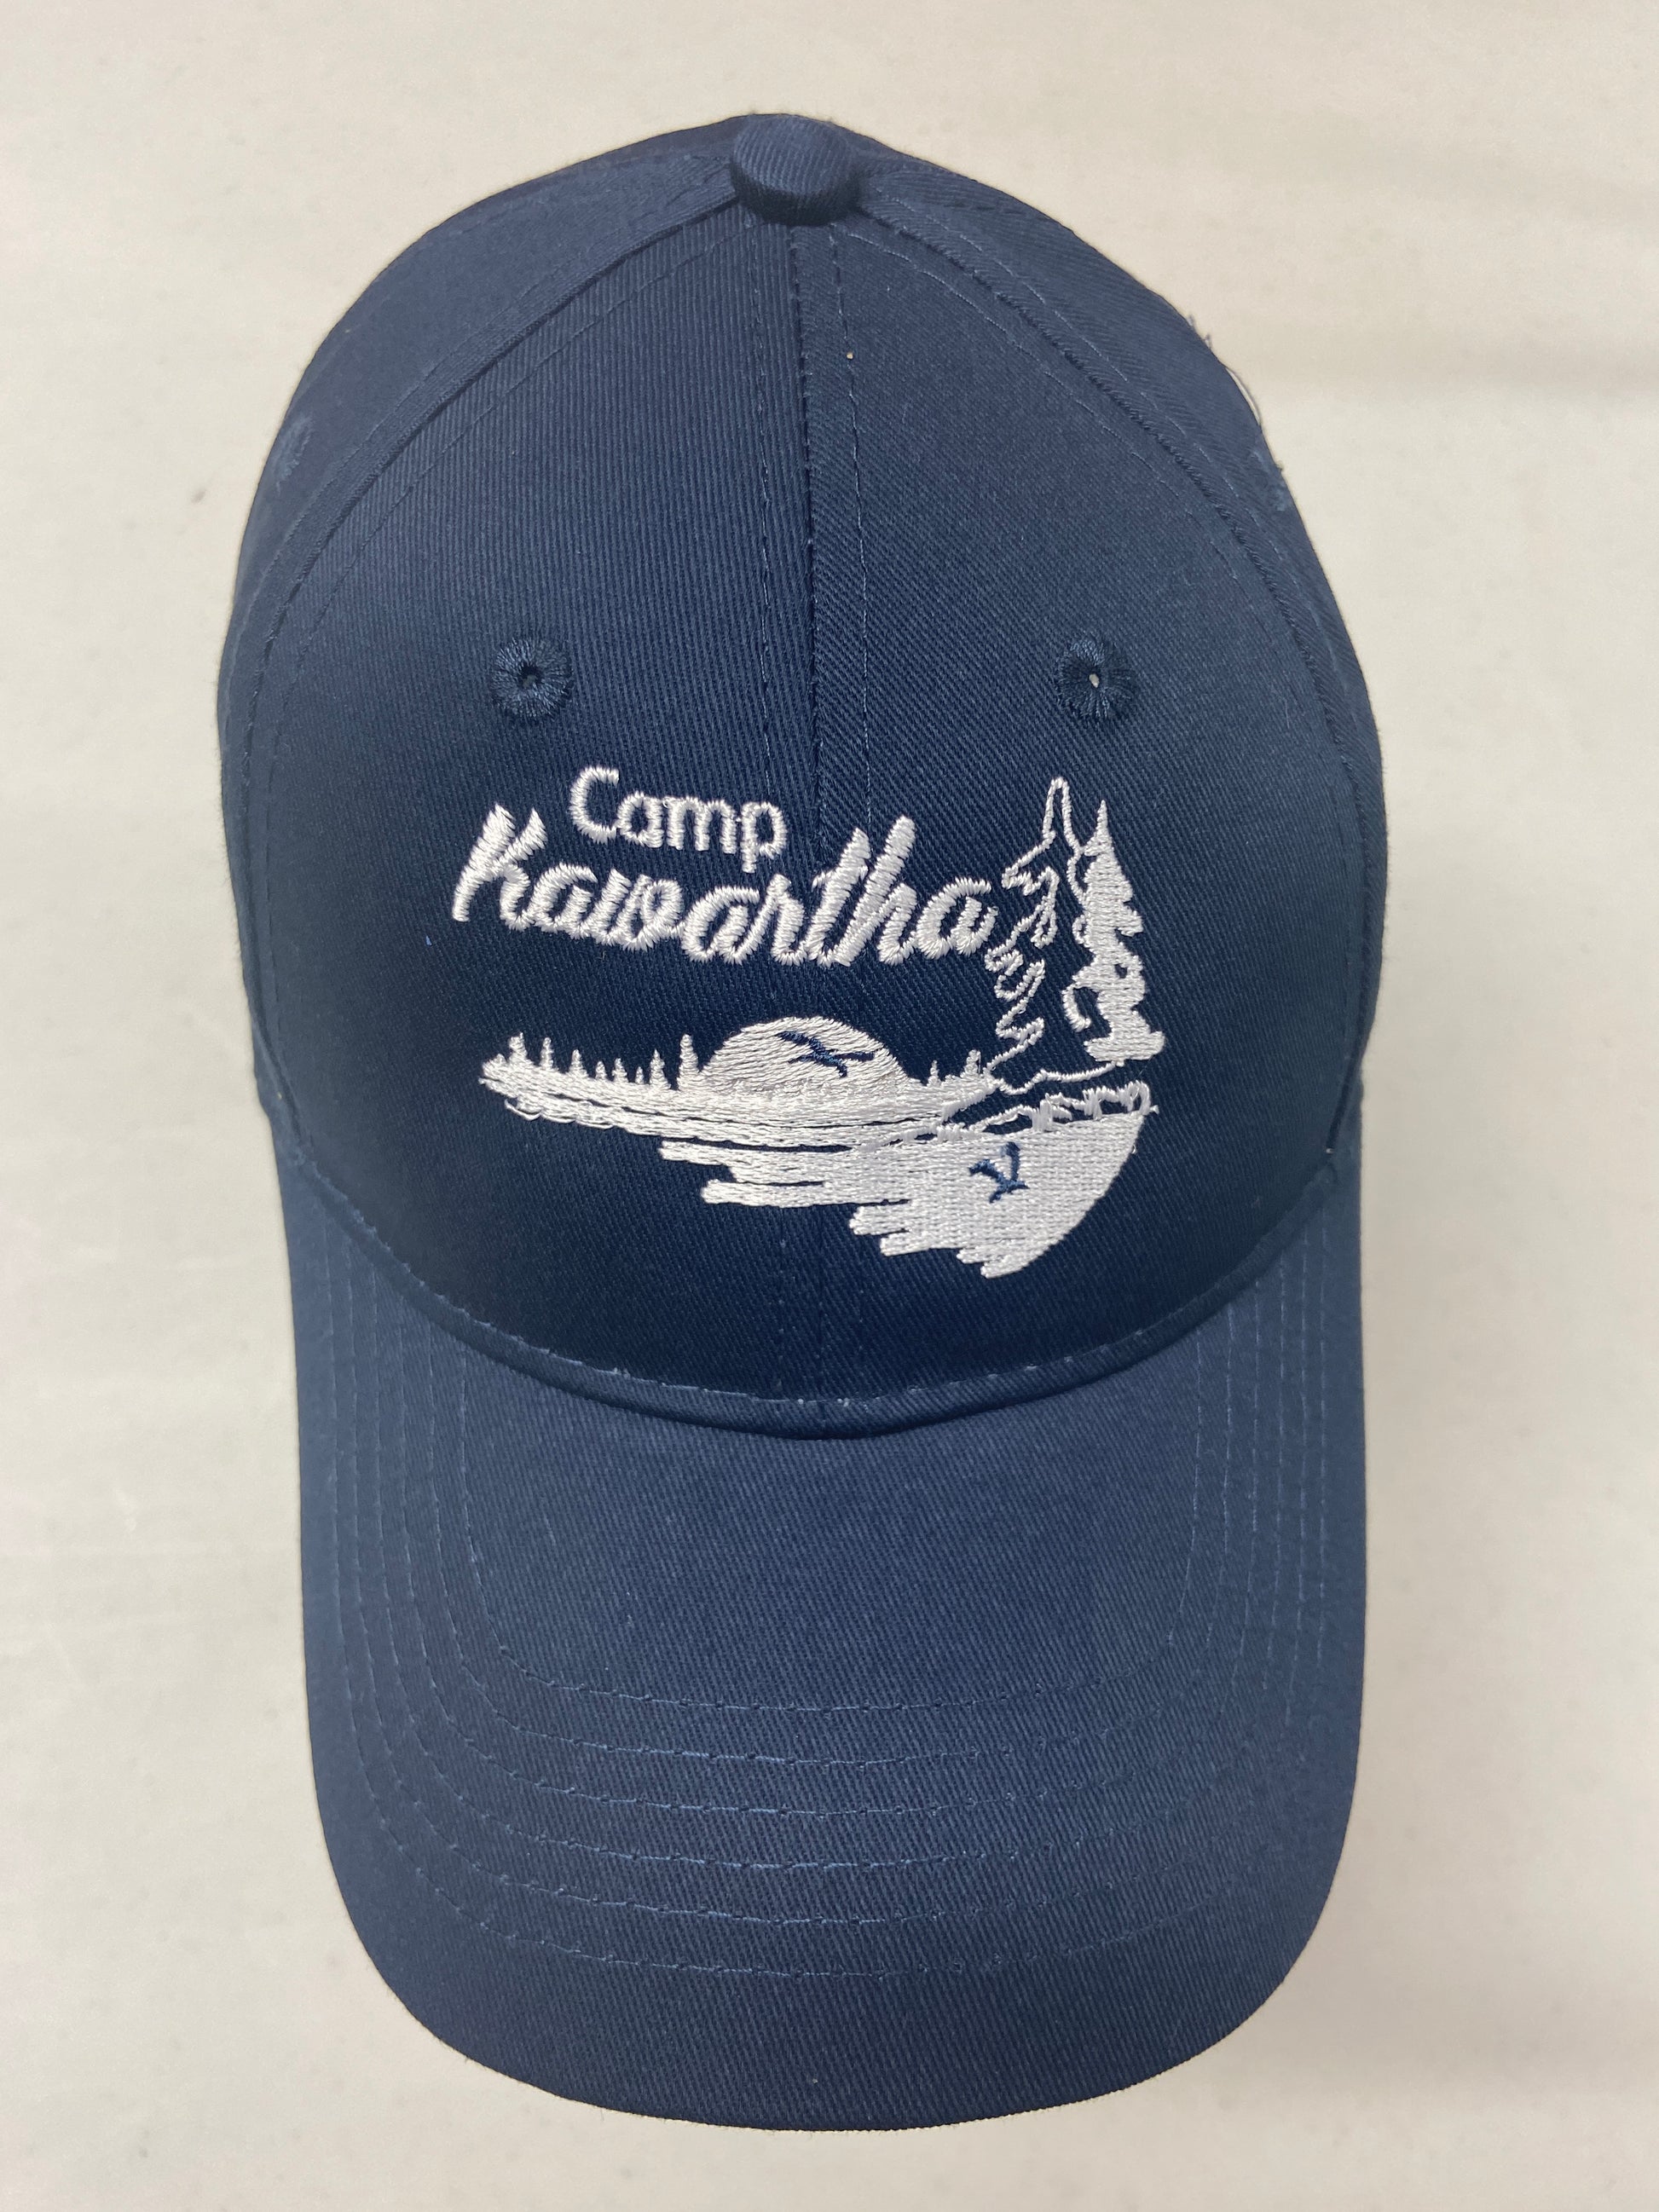 Youth-sized structured ball cap in navy.